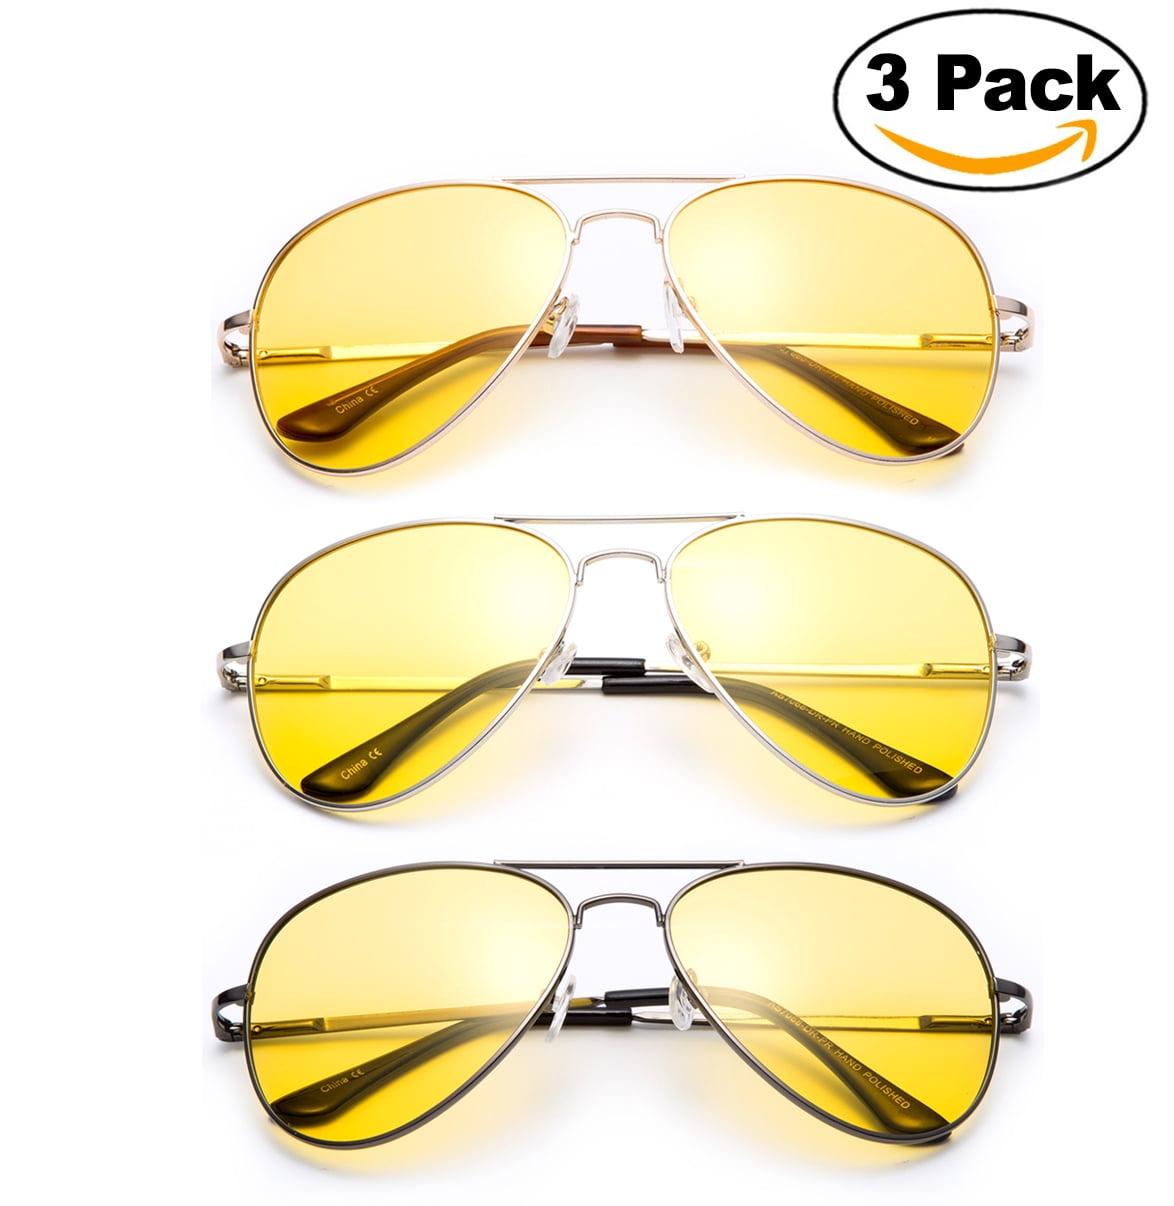 HD HIGH DEFINITION NIGHT DRIVE VISION CLIP ON FLIP UP SUNGLASSES YELLOW 